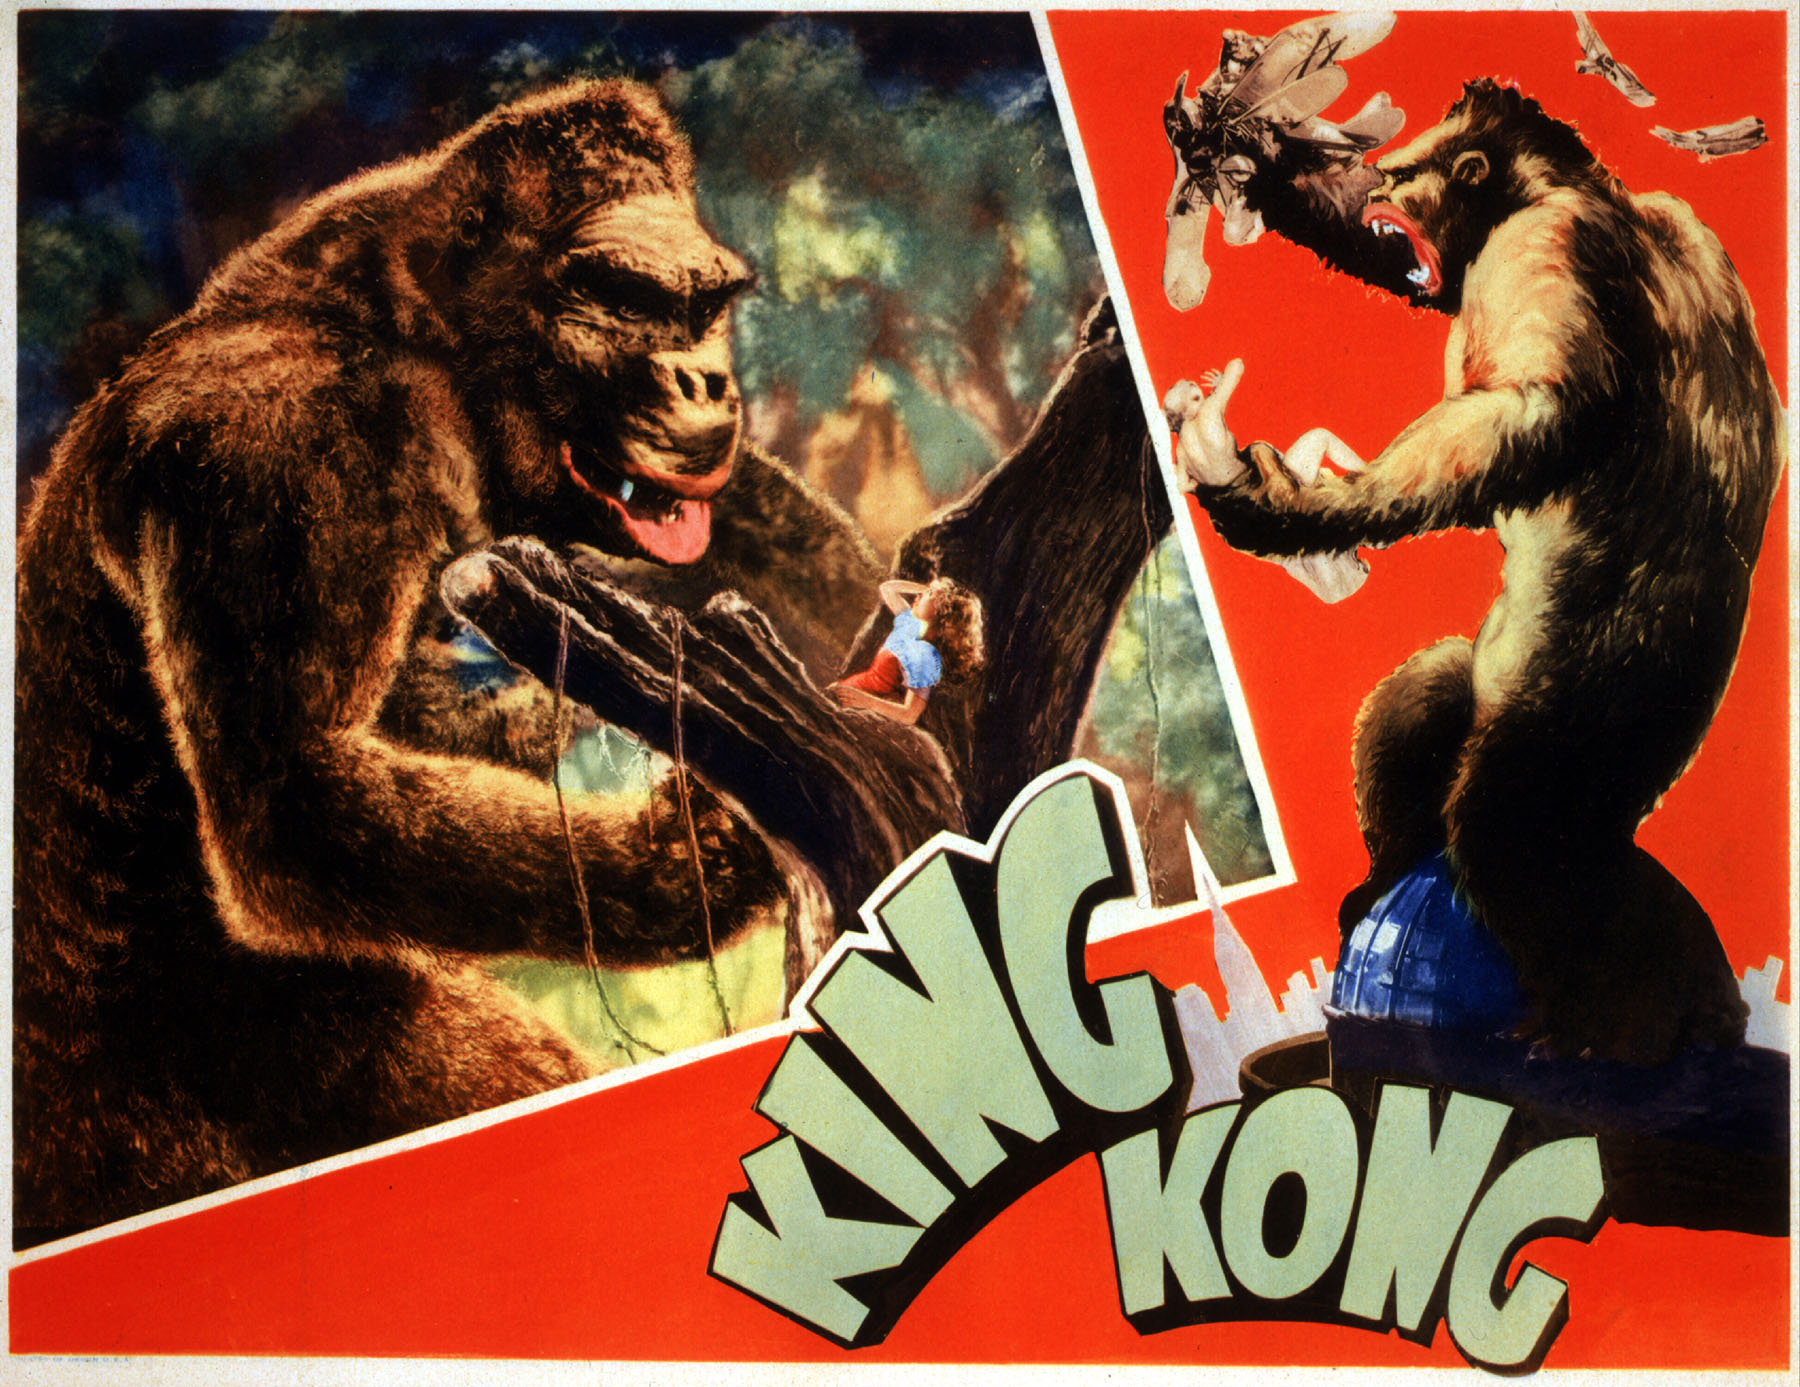 Amazing King Kong (1933) Pictures & Backgrounds